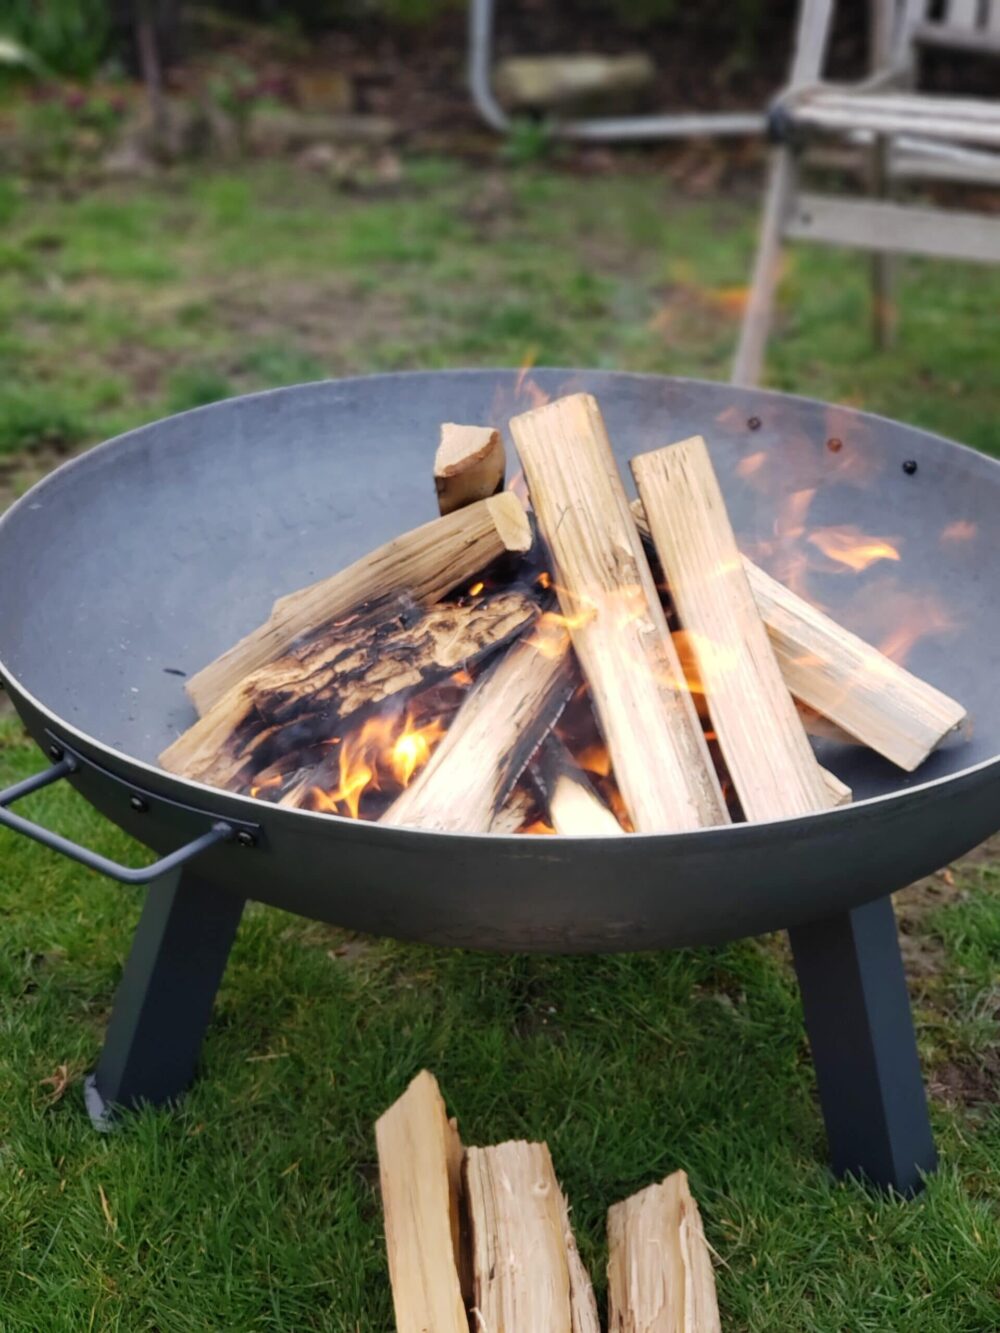 Fire Pit On Grass 5 Best Ways To, How To Put A Fire Pit On Grass